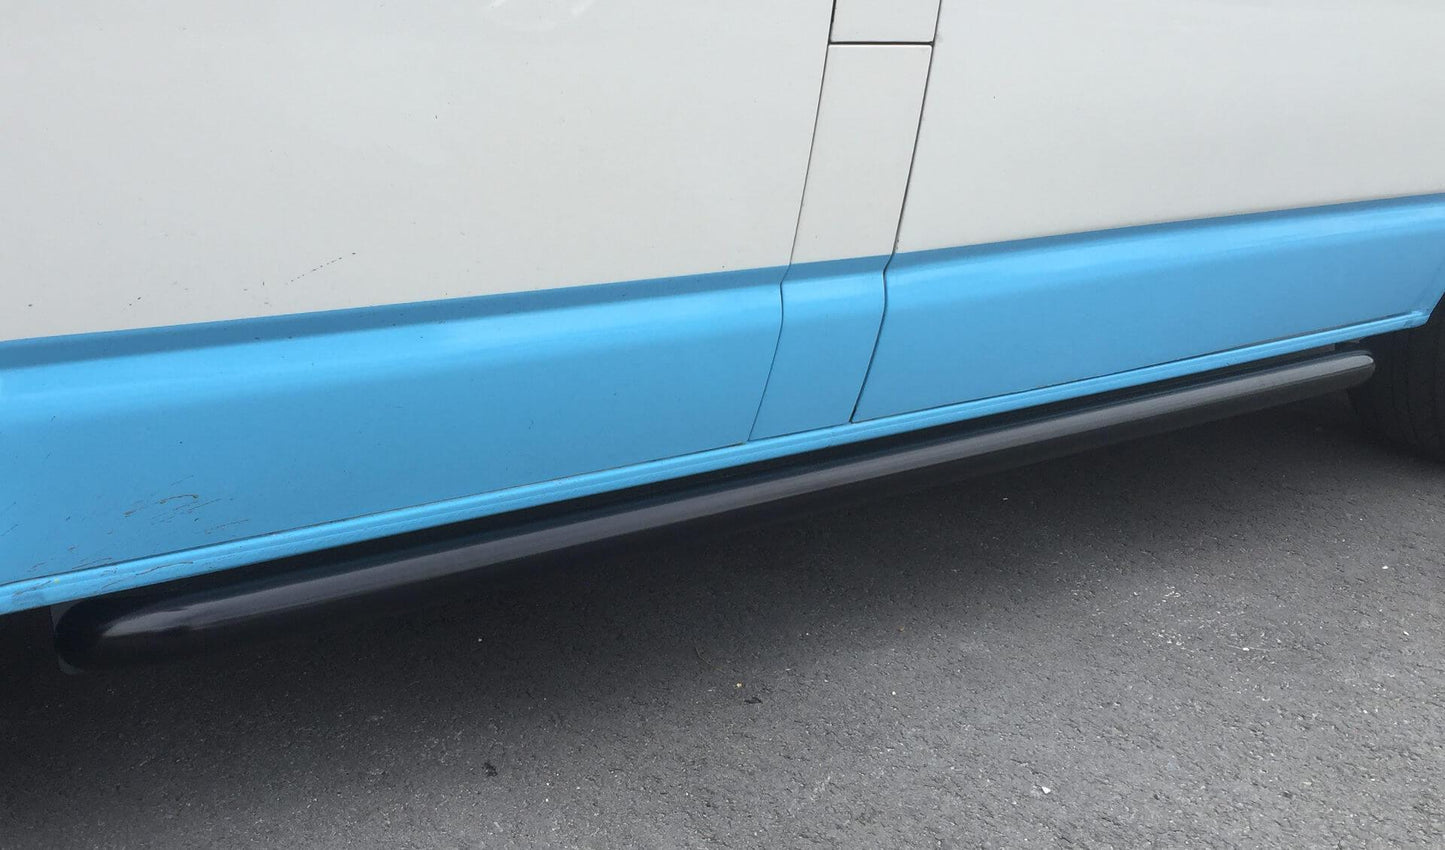 Black Powder Coated OE Style Steel Side Bars for Volkswagen Transporter T5 LWB -  - sold by Direct4x4